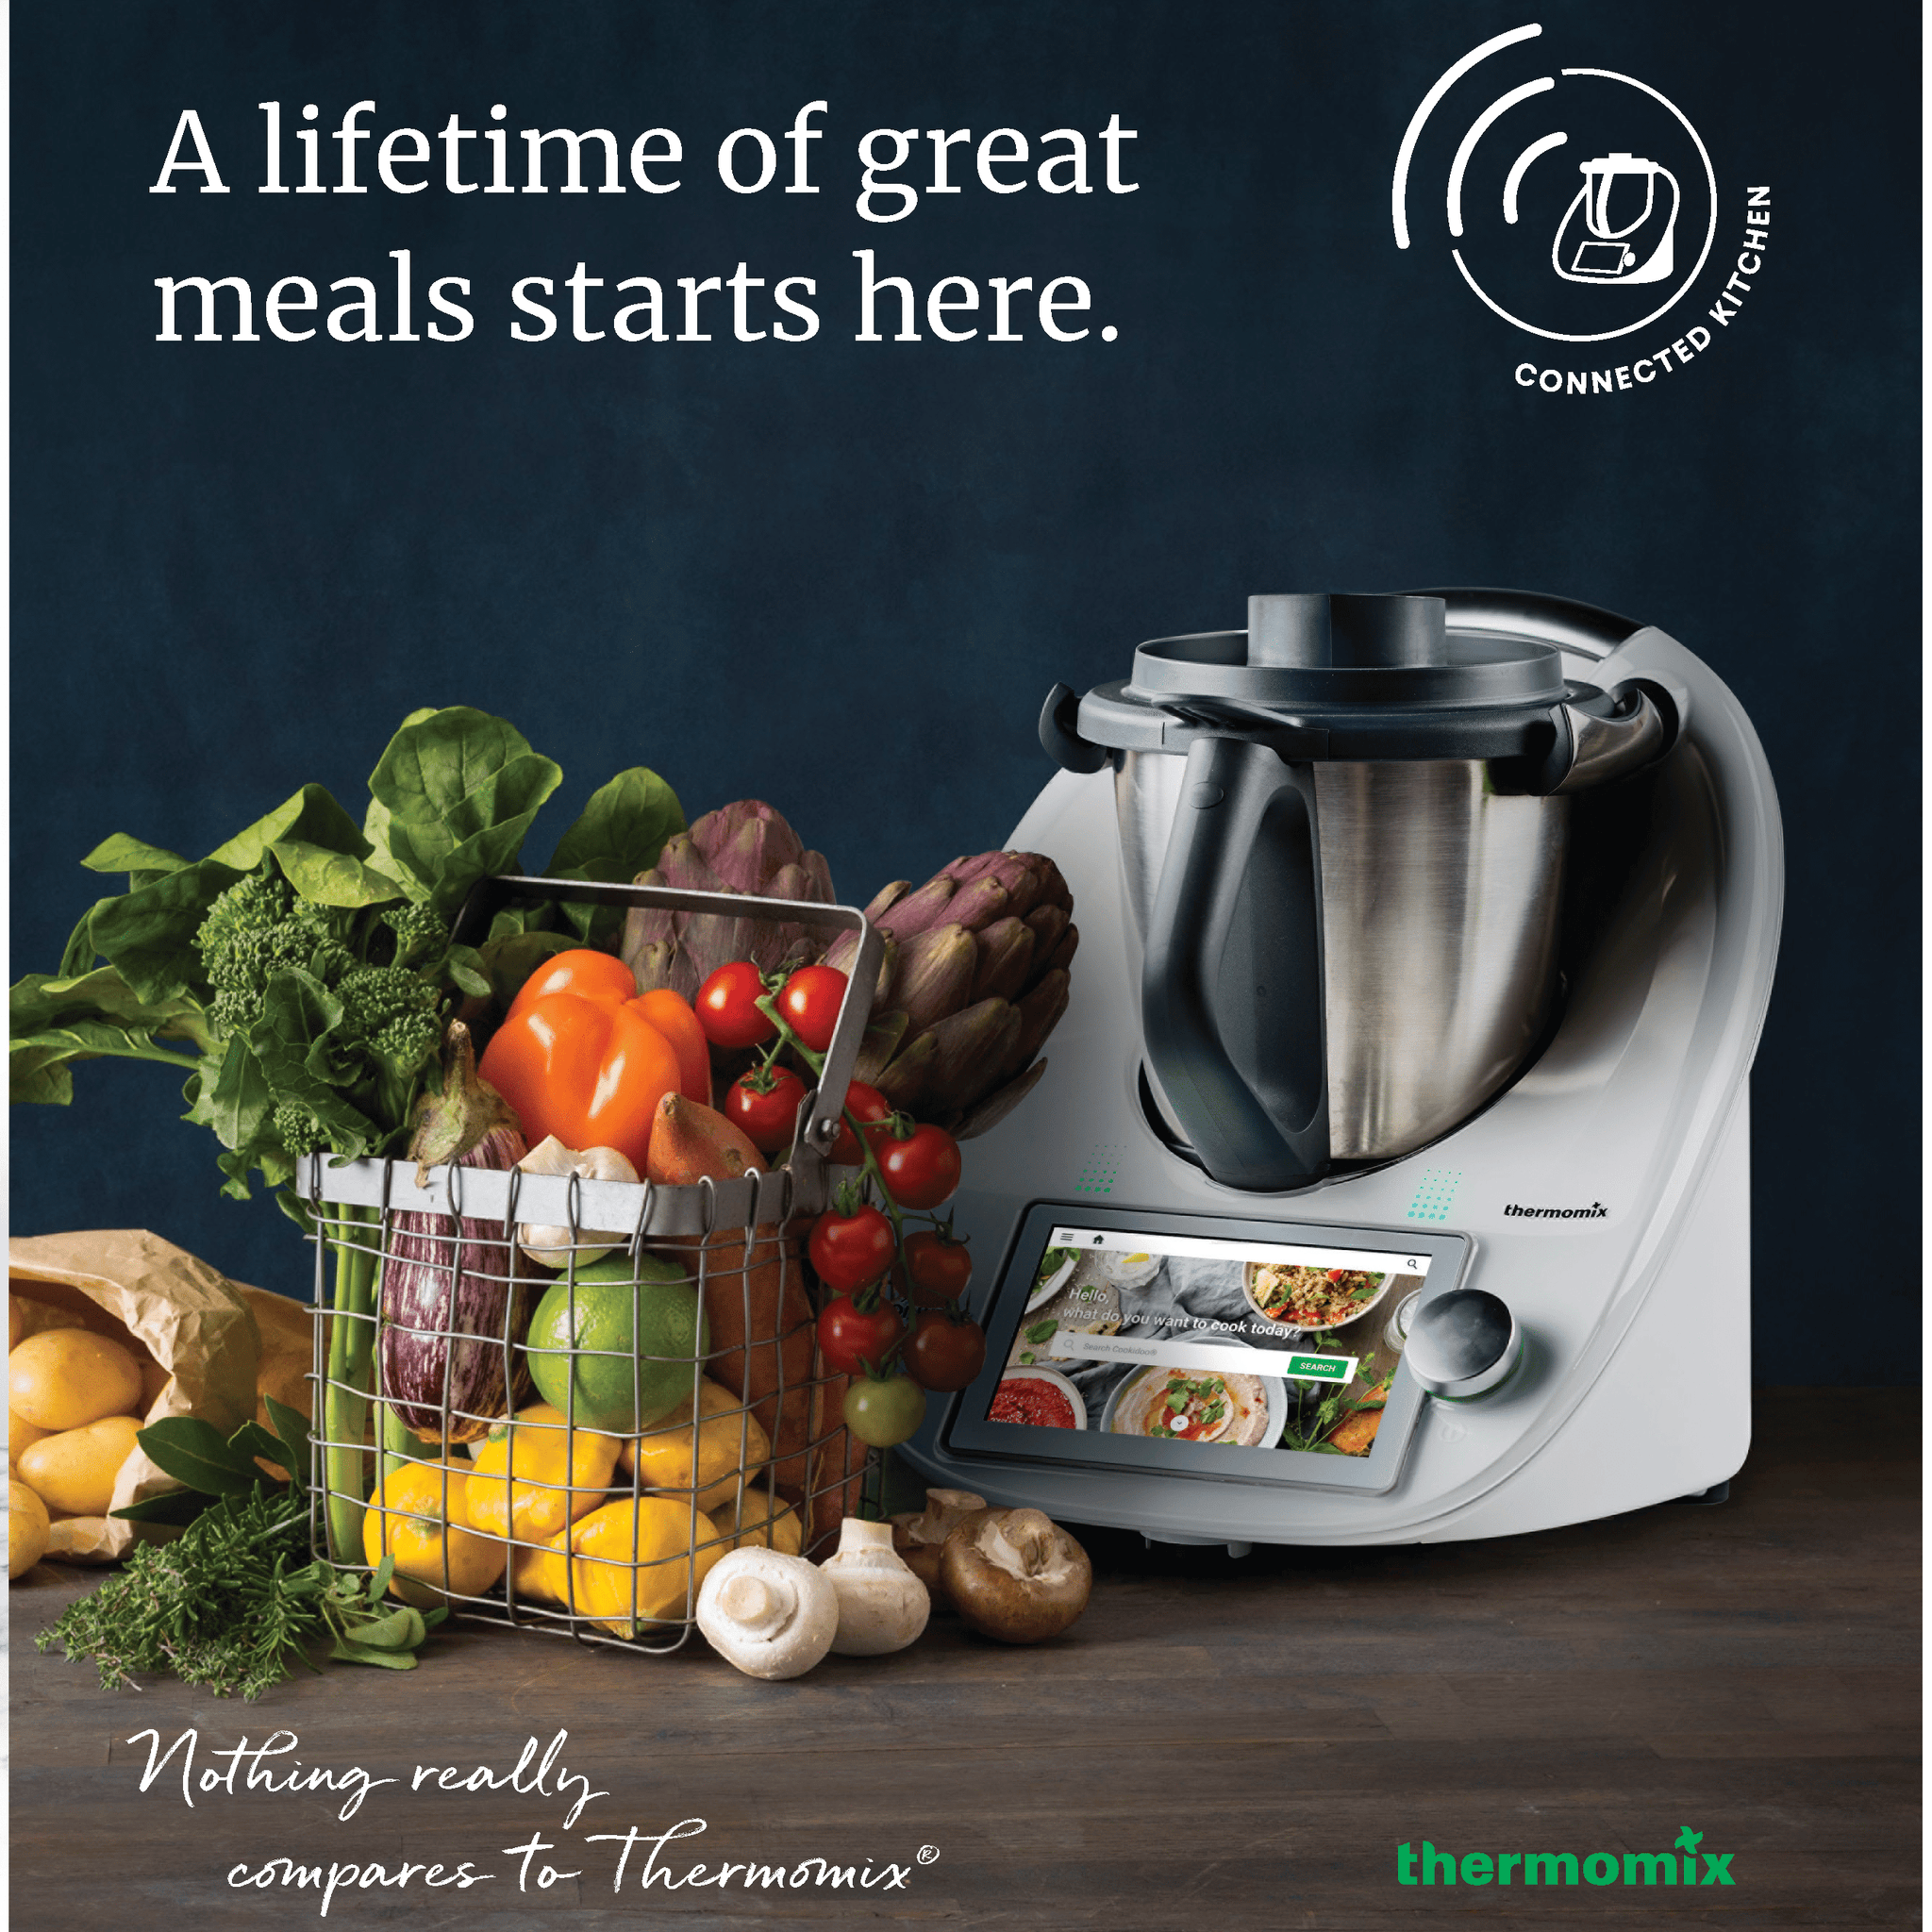 Thermomix-New-Zealand Thermomix® TM6 Product Brochure Stationery